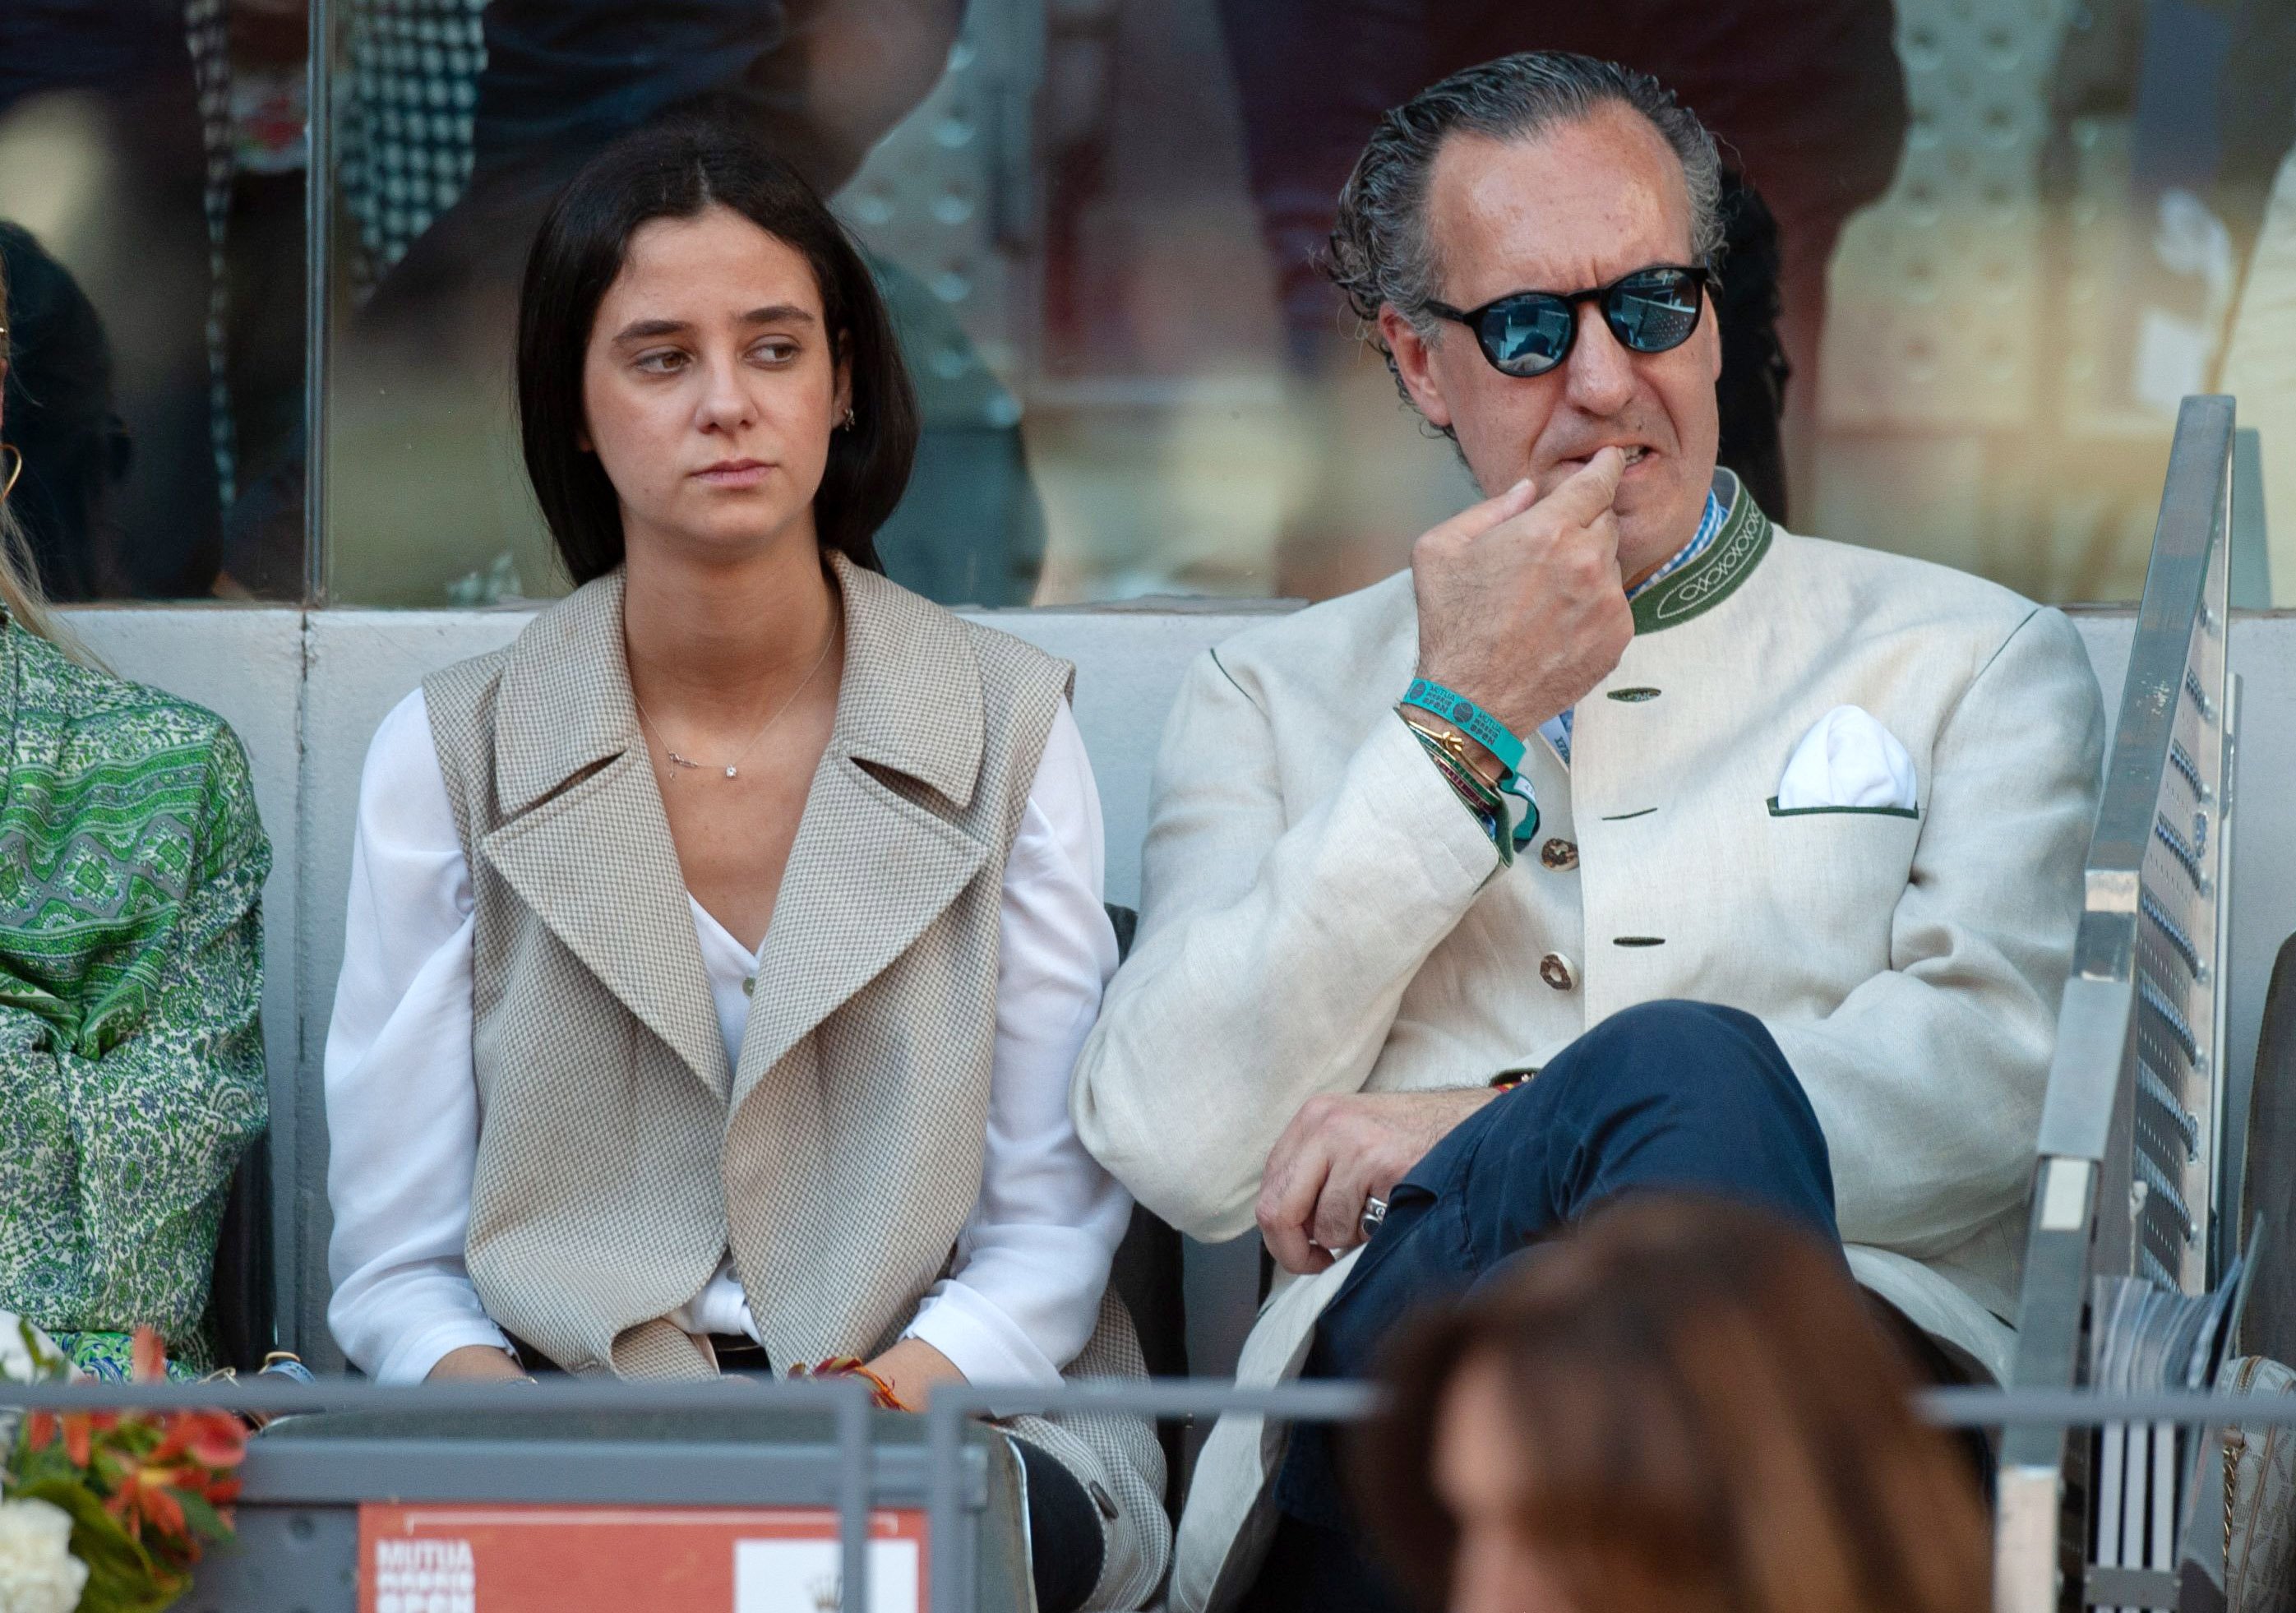 Jaime de Marichalar and Victoria Federica at Mutua Madrid Open on May 12, 2019, in Madrid, Spain | Source: Getty Images